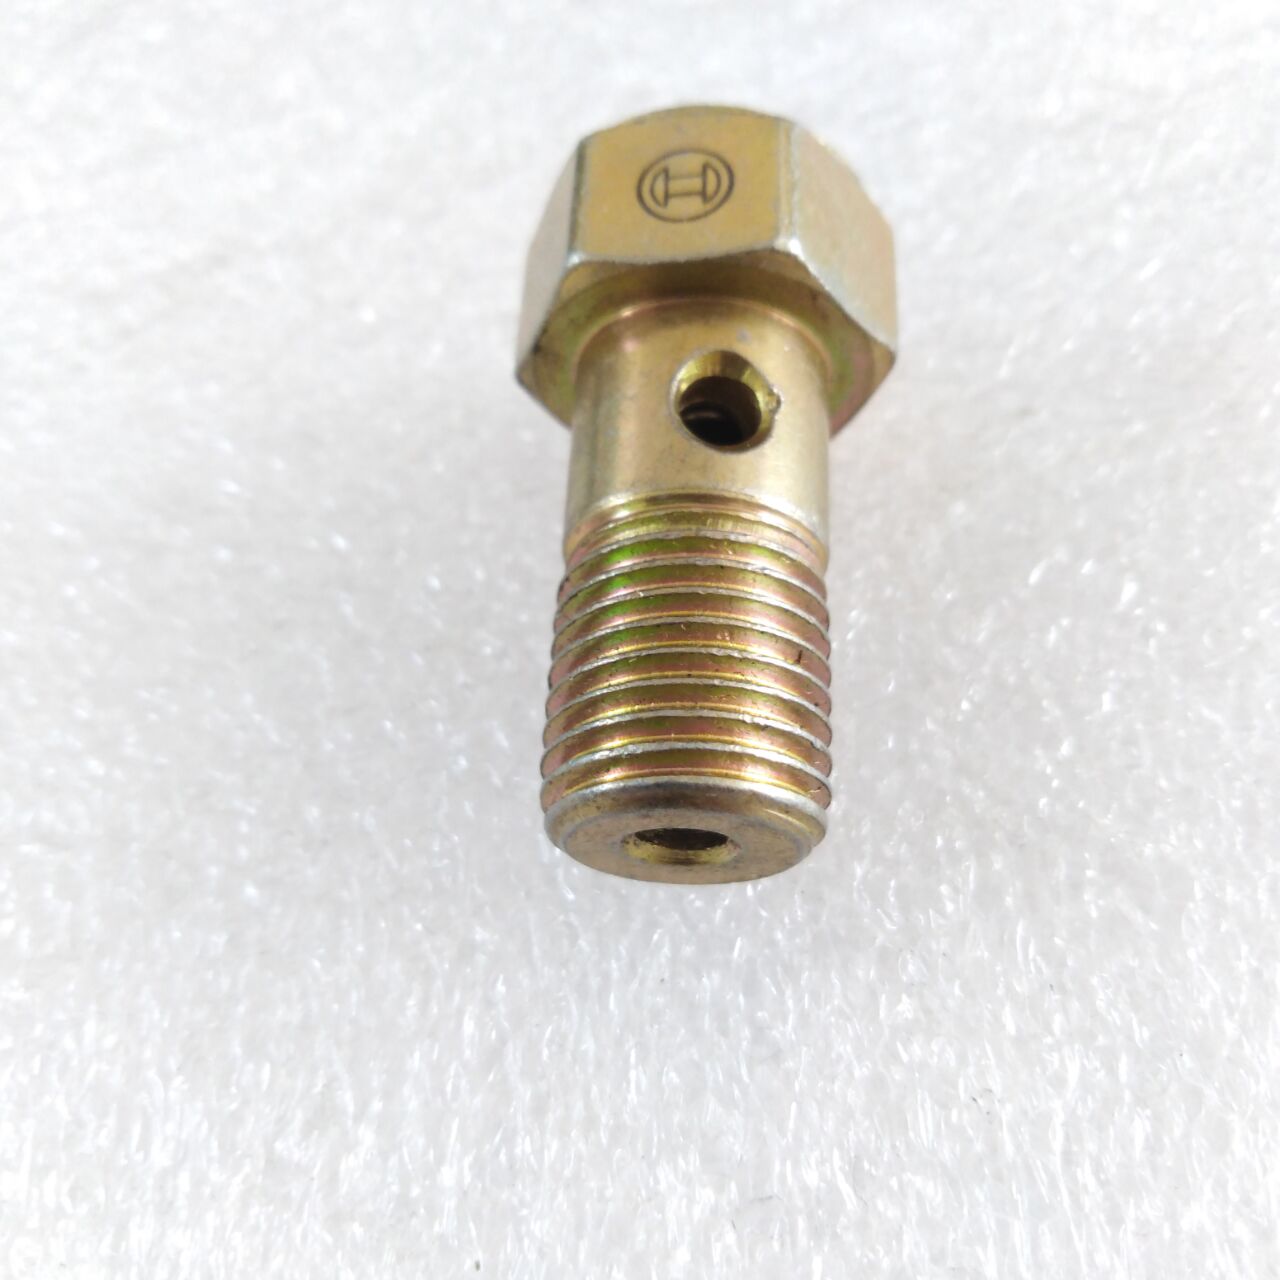 Bosch Fuel Overflow Valve  with One Hole  1417413047